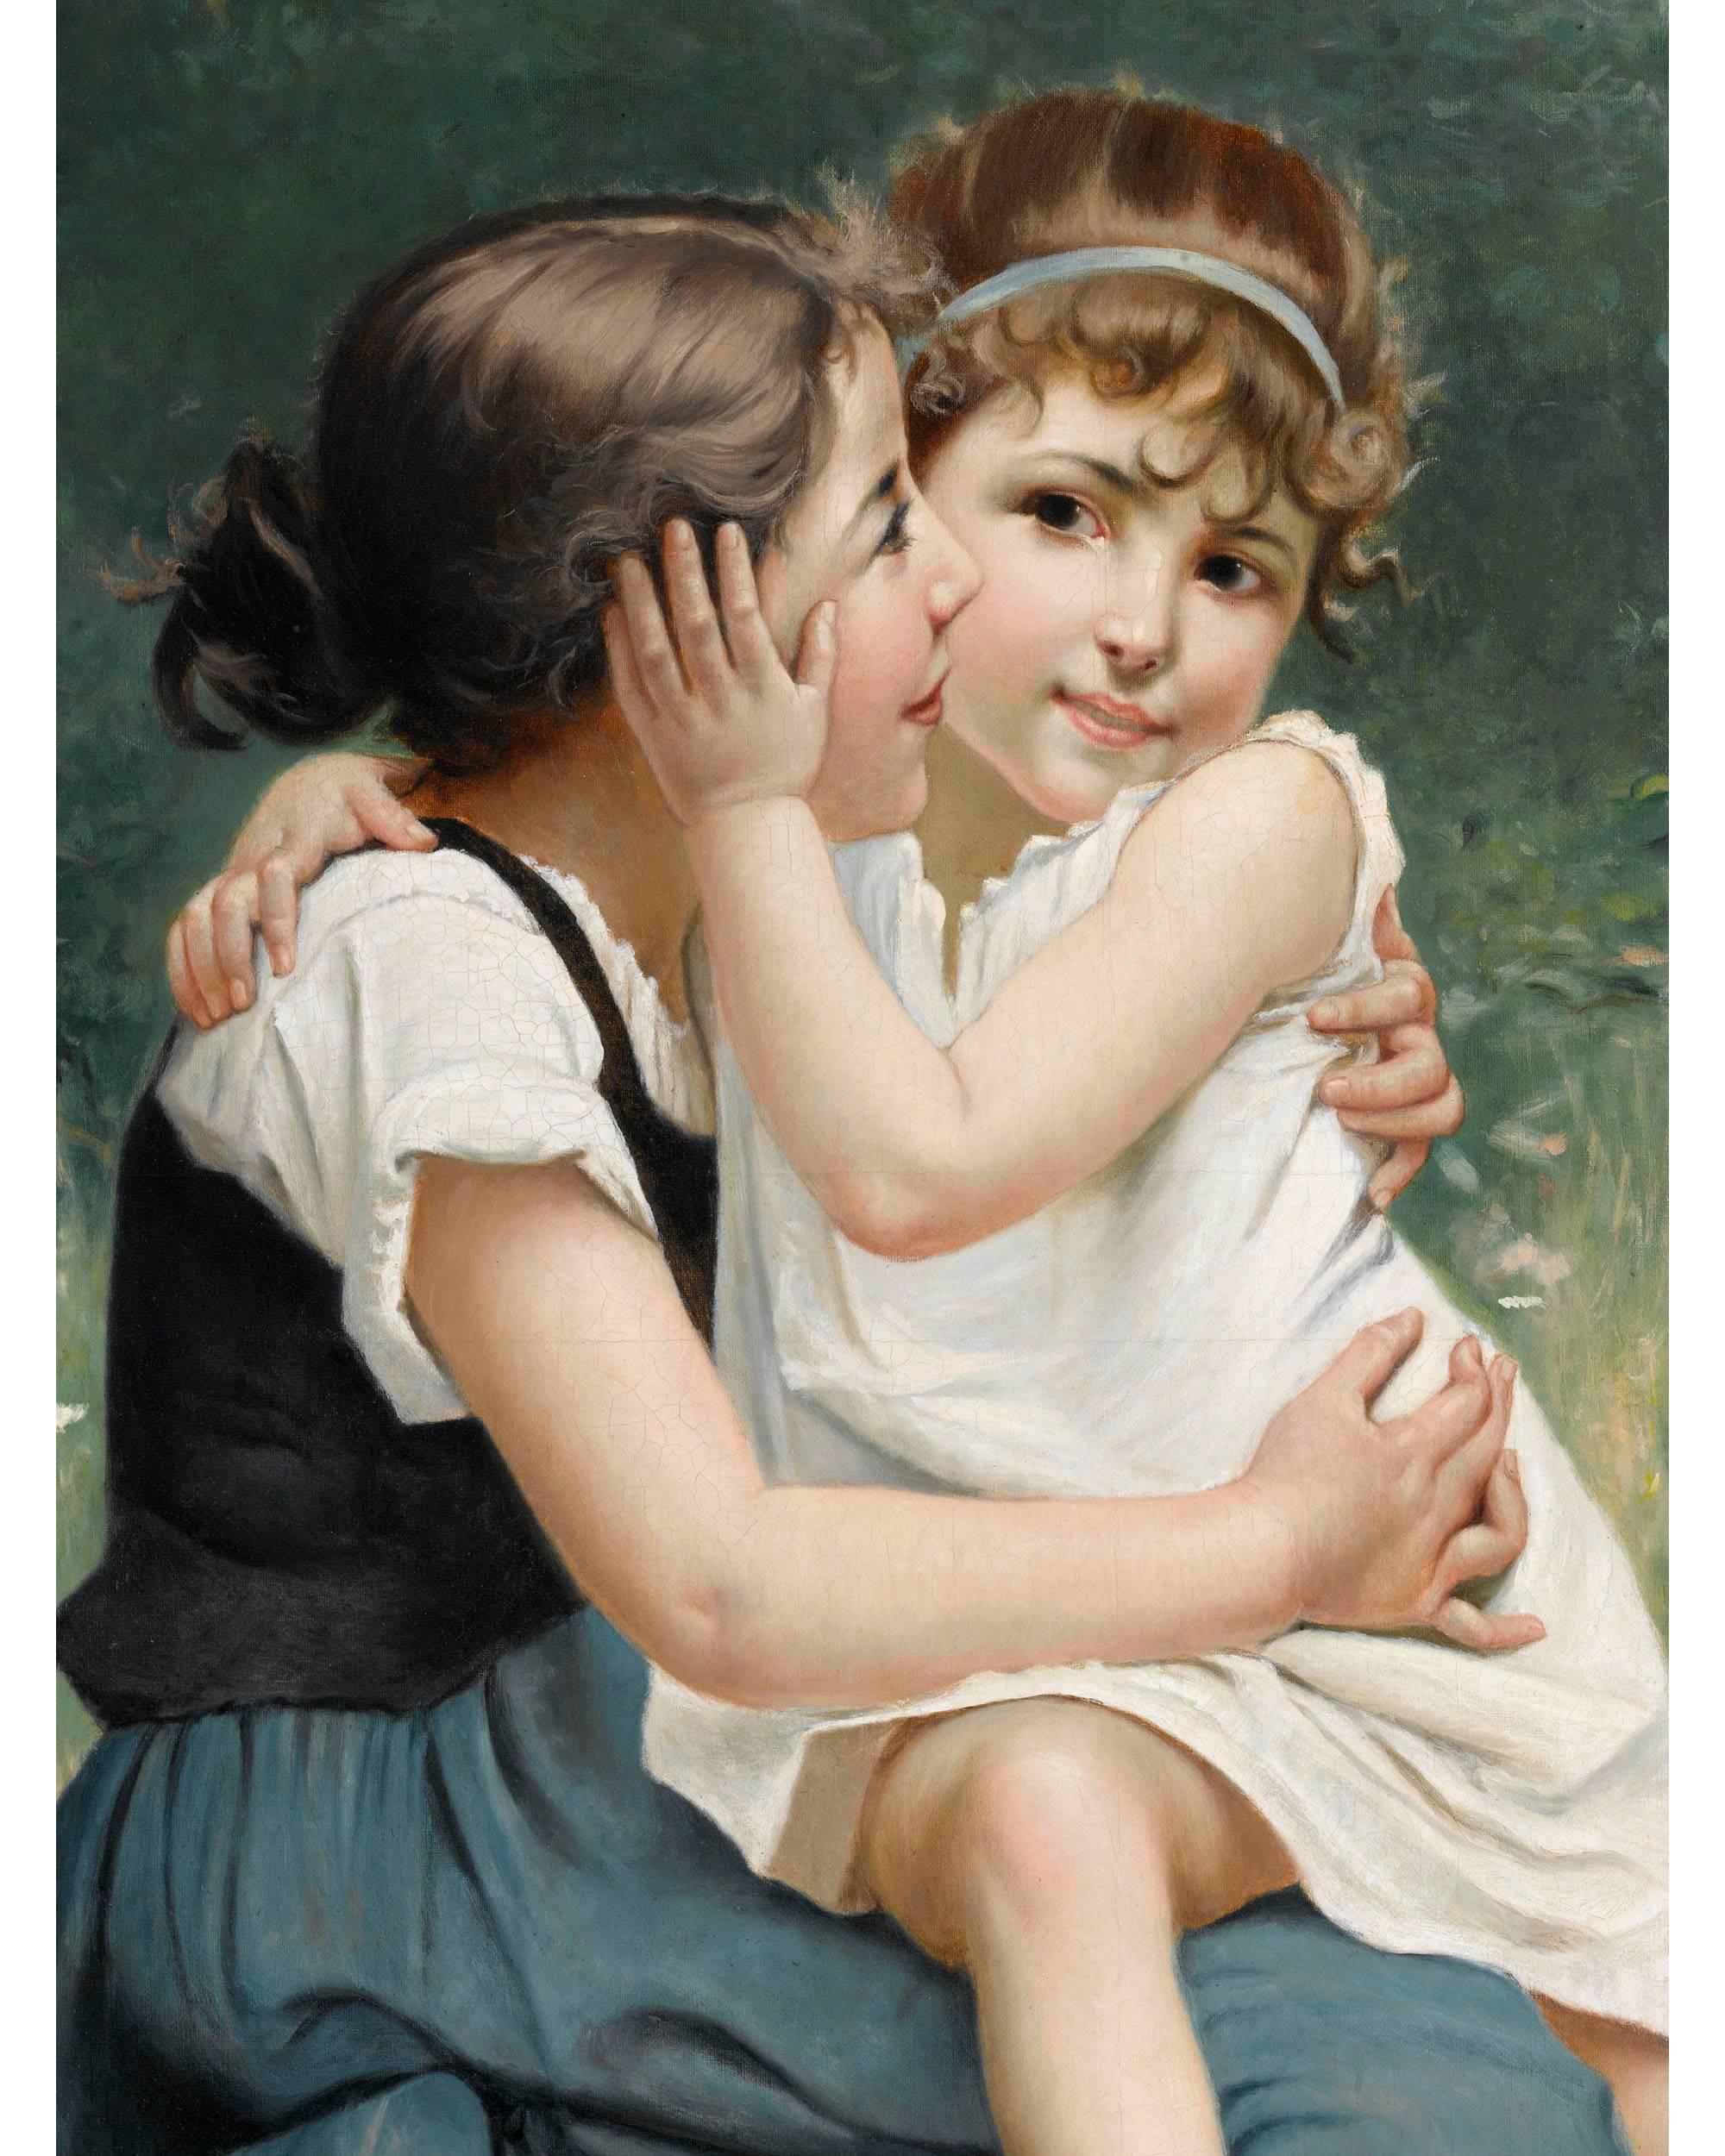 Other Sisterly Love by Francois Alfred Delobbe